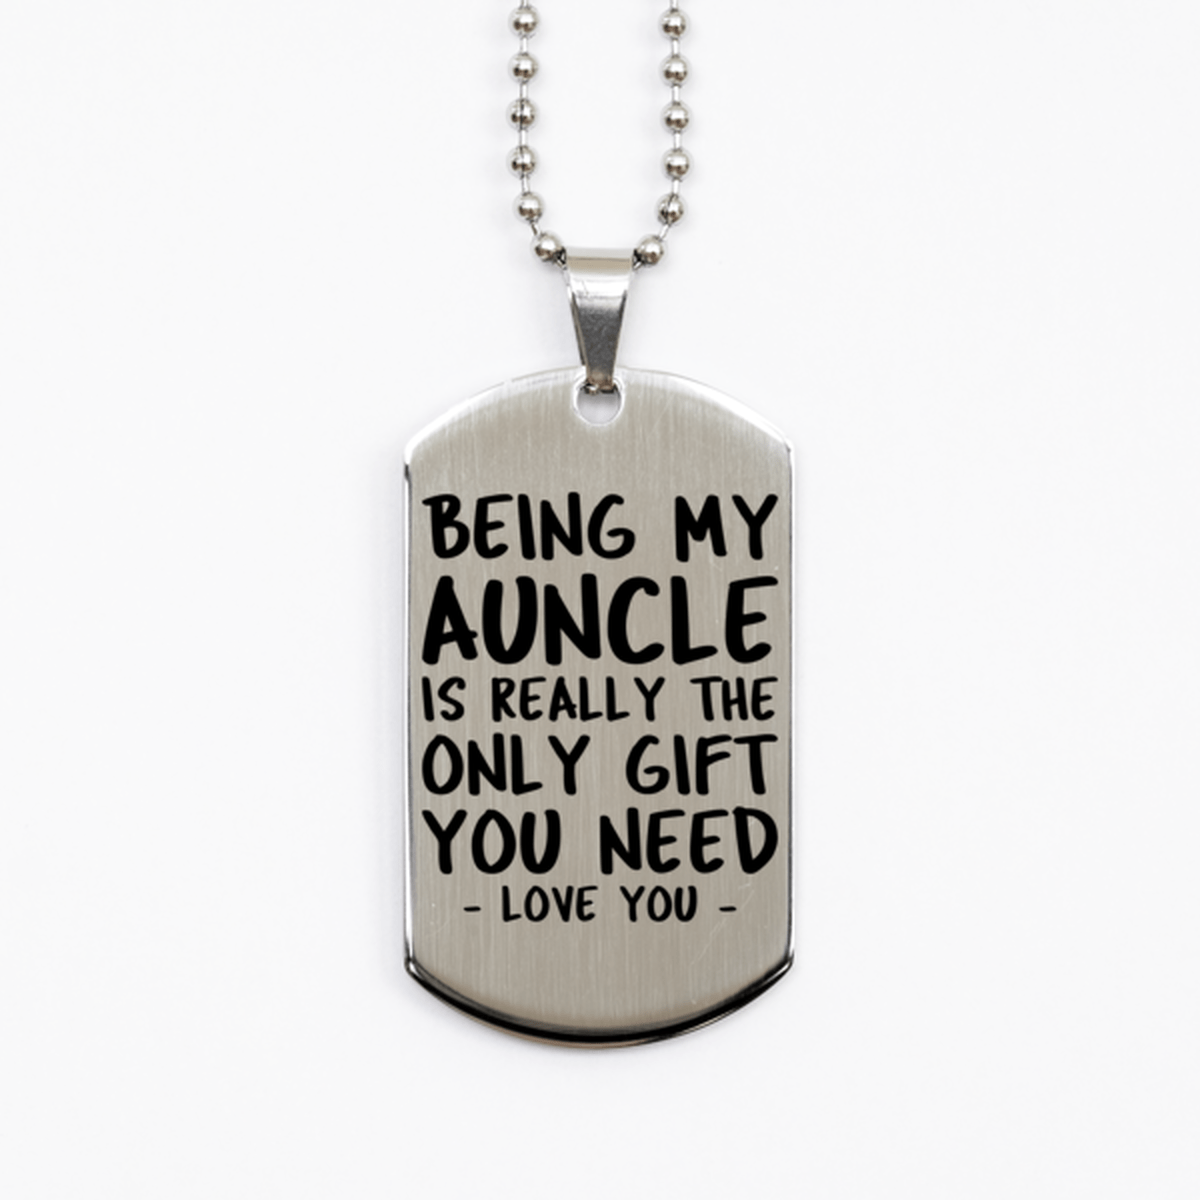 Funny Auncle Silver Dog Tag Necklace, Being My Auncle Is Really the Only Gift You Need, Best Birthday Gifts for Auncle